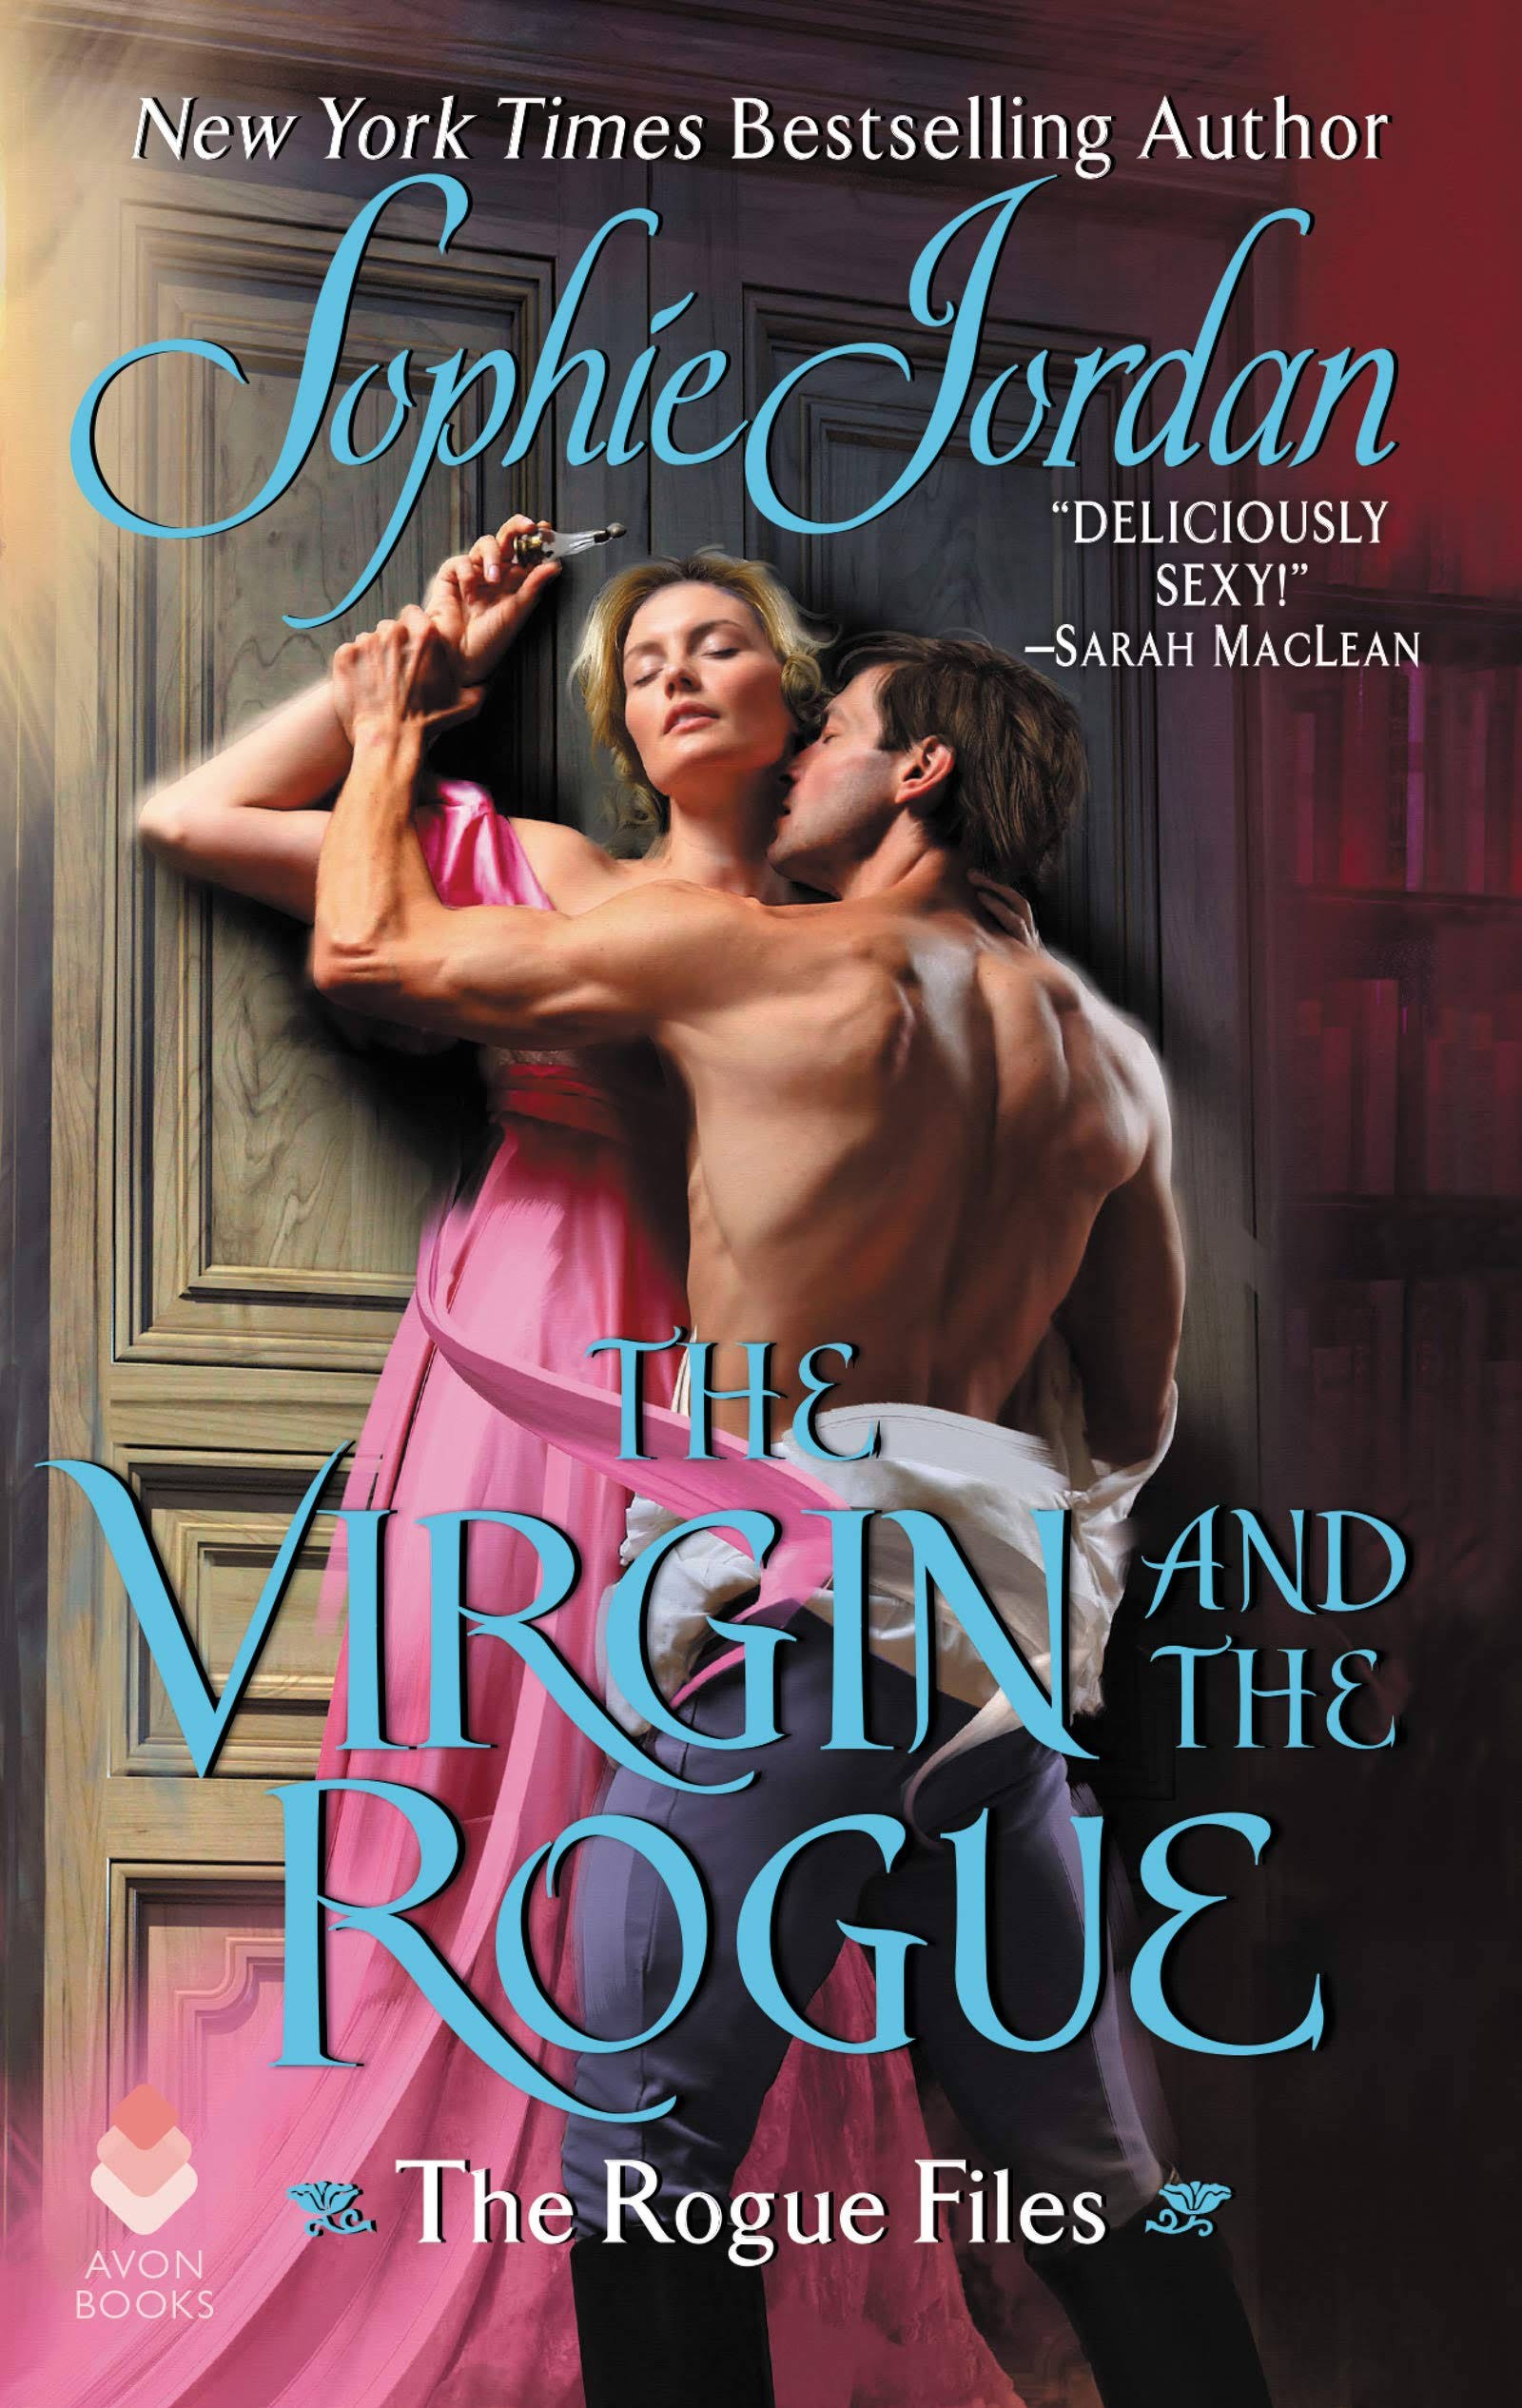 The Virgin and the Rogue: The Rogue Files [Book]